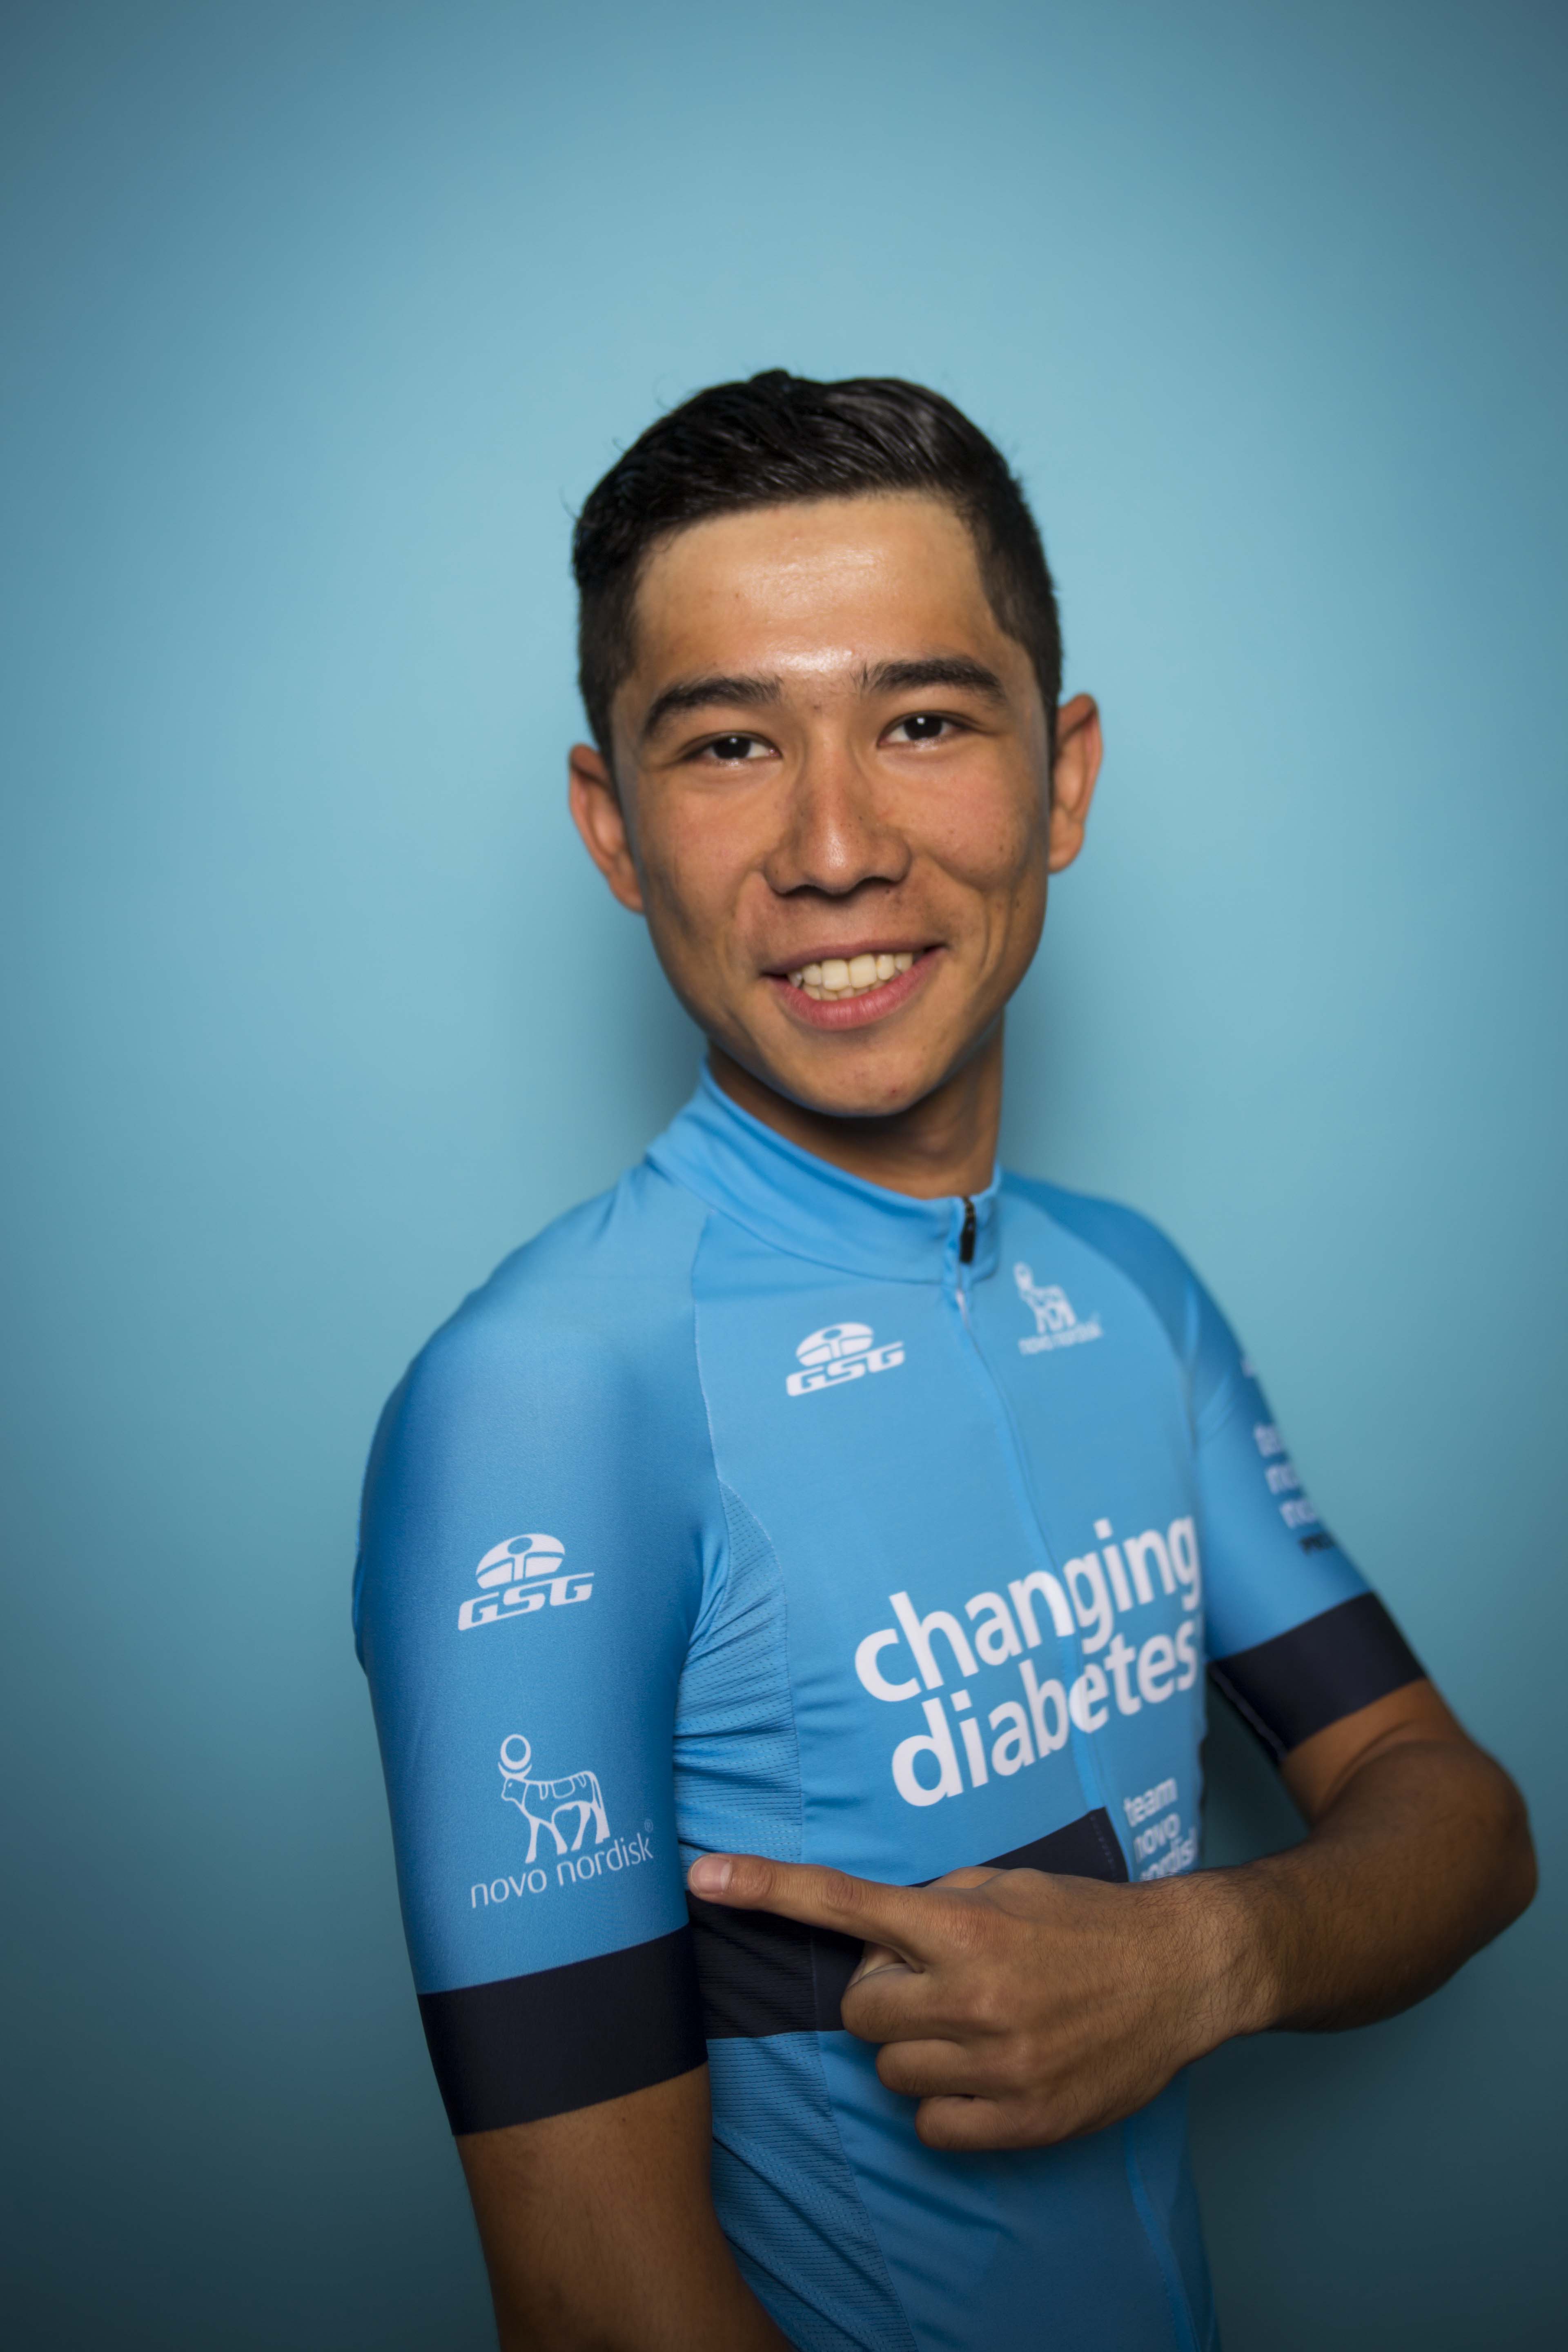 The 22-year-old Ulugbek Saidov hails from Tashkent, Uzbekistan and will be Team Novo Nordisk first professional rider from Central Asia.